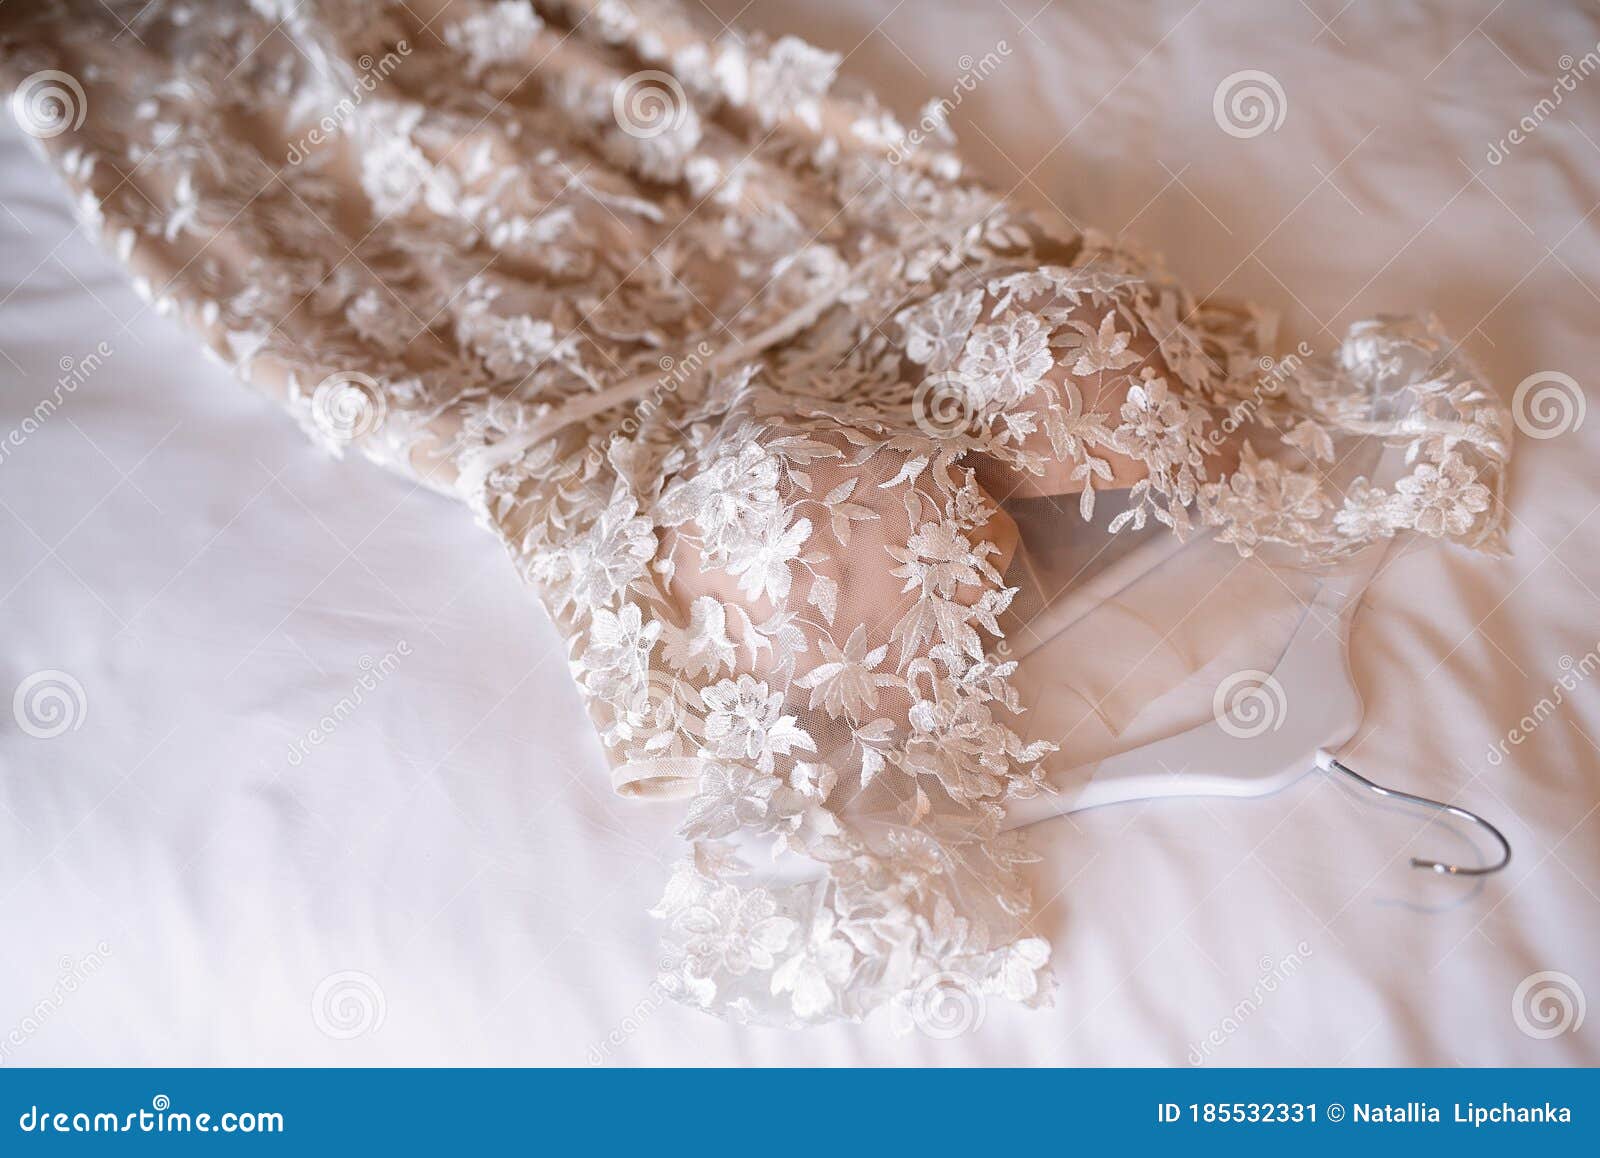 Outfit of the Bride ,the Wedding Dress Lies on the Bed, White Bedding ...